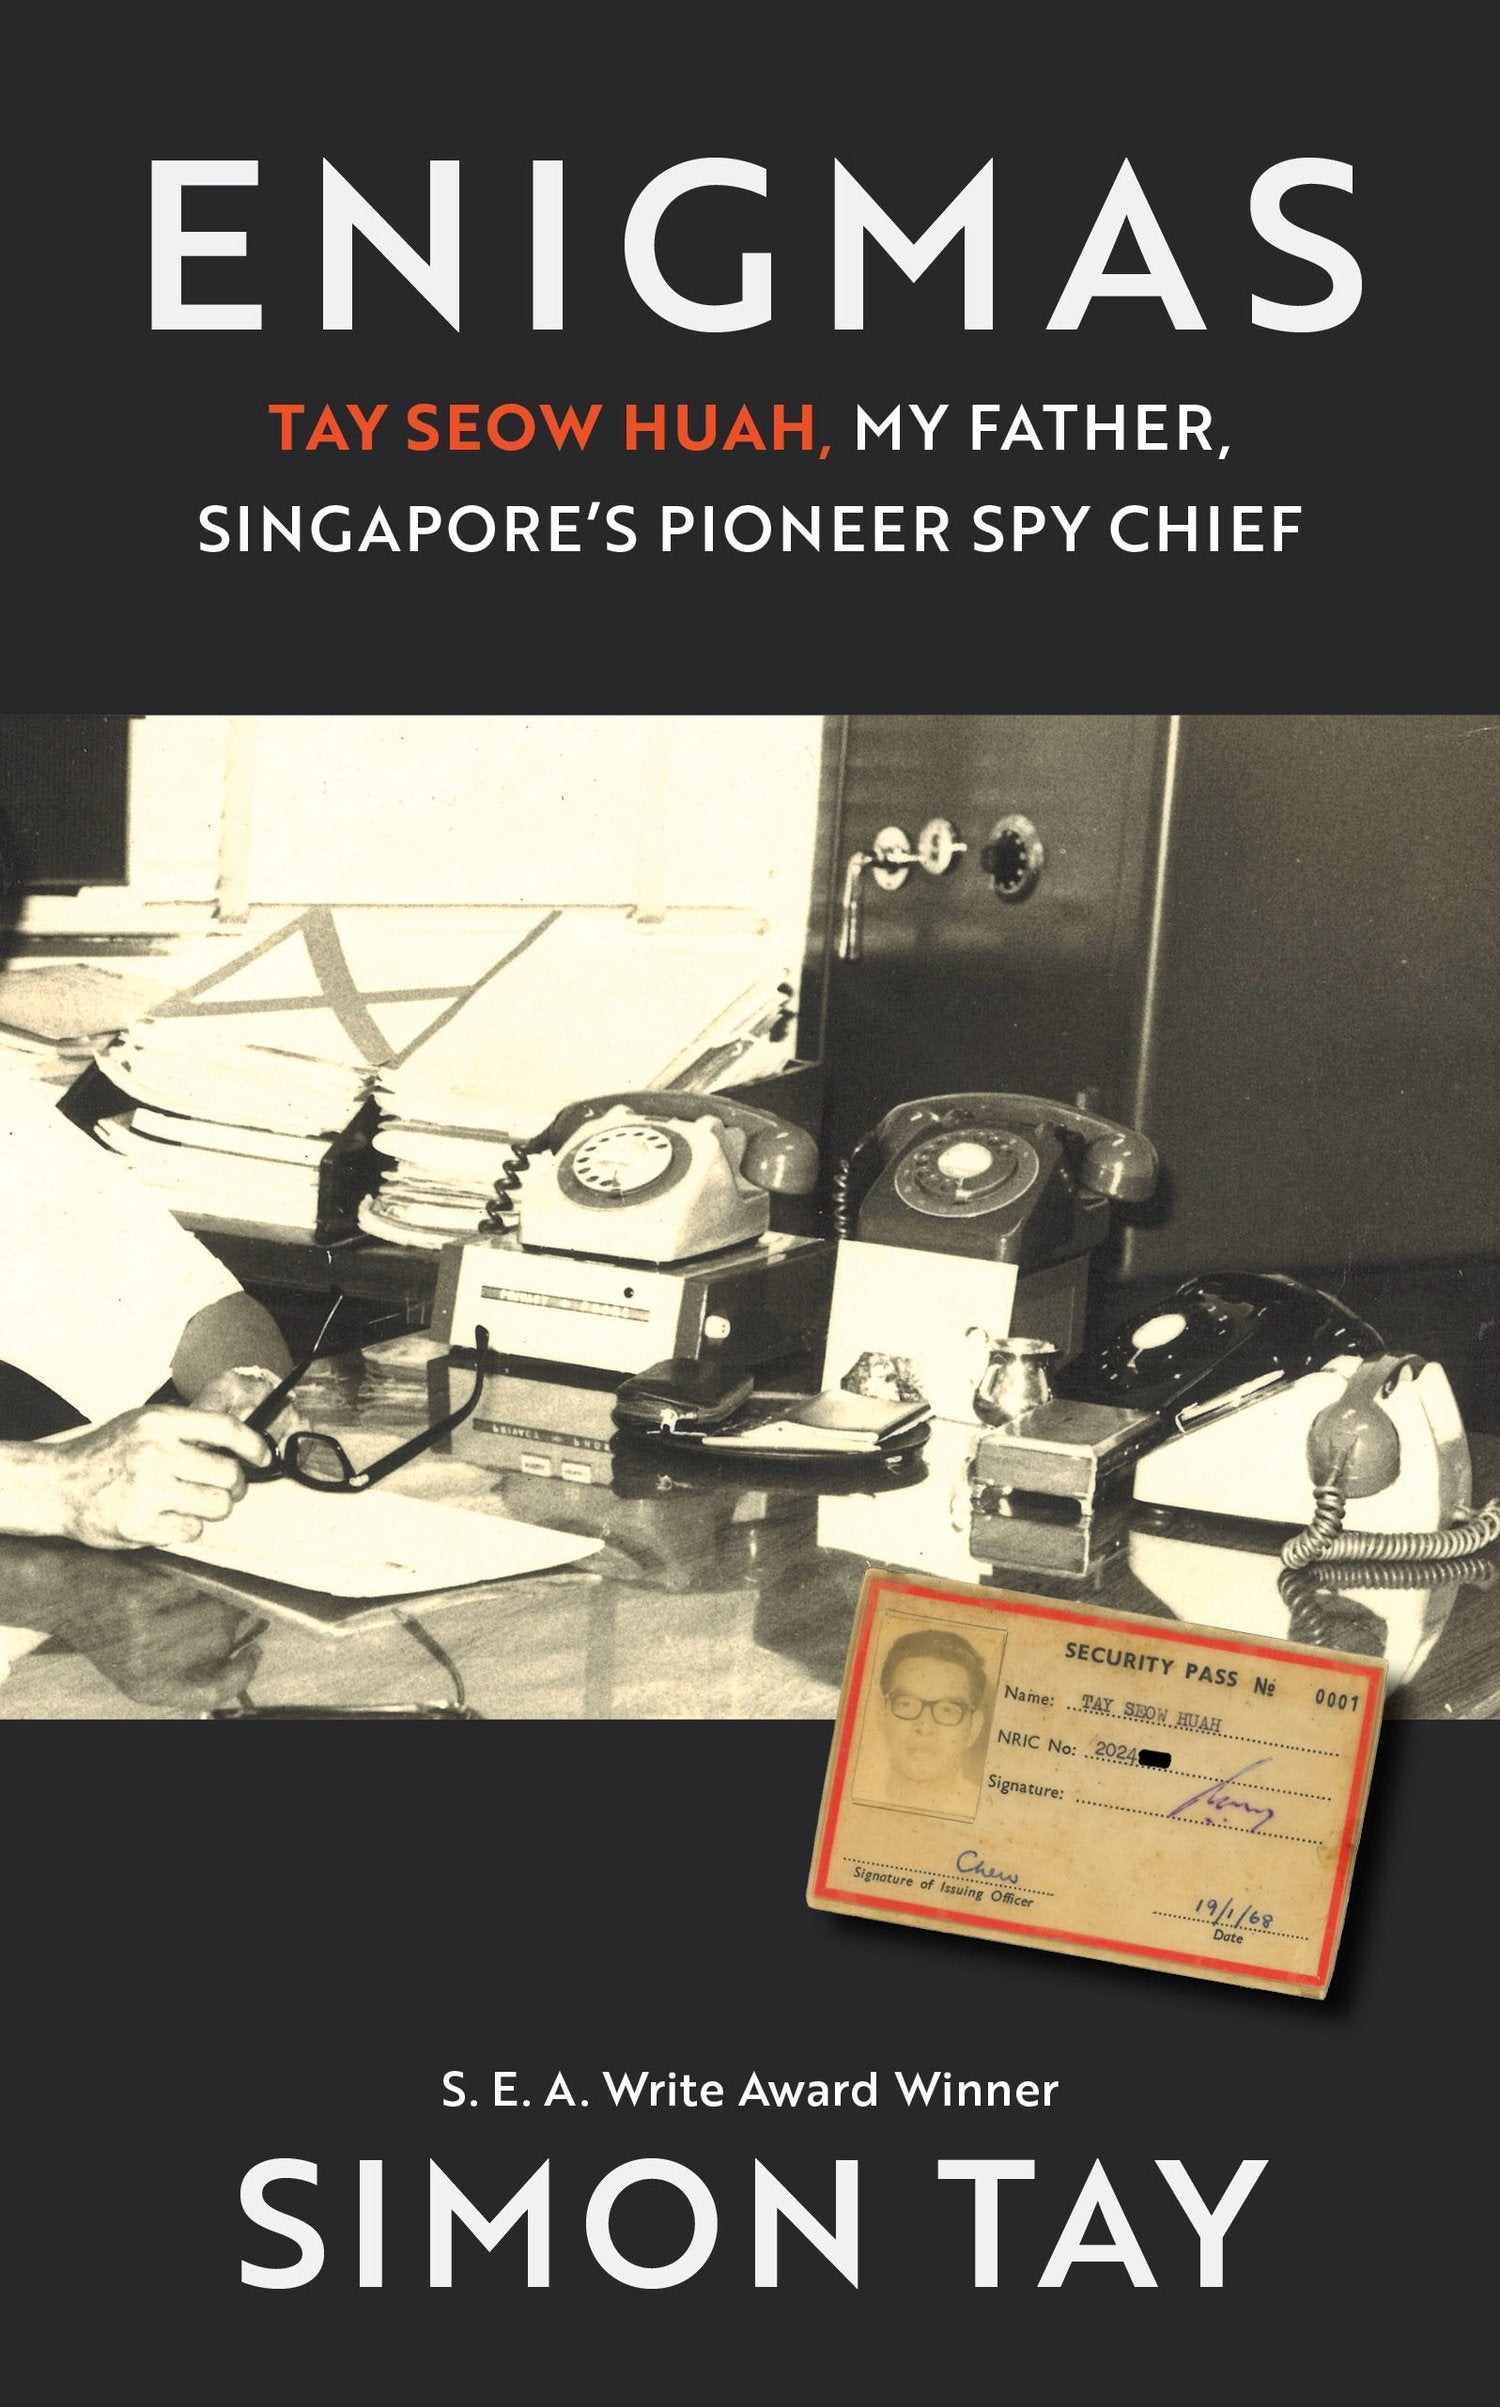 ENIGMAS: Tay Seow Huah, My Father, Singapore’s Pioneer Spy Chief